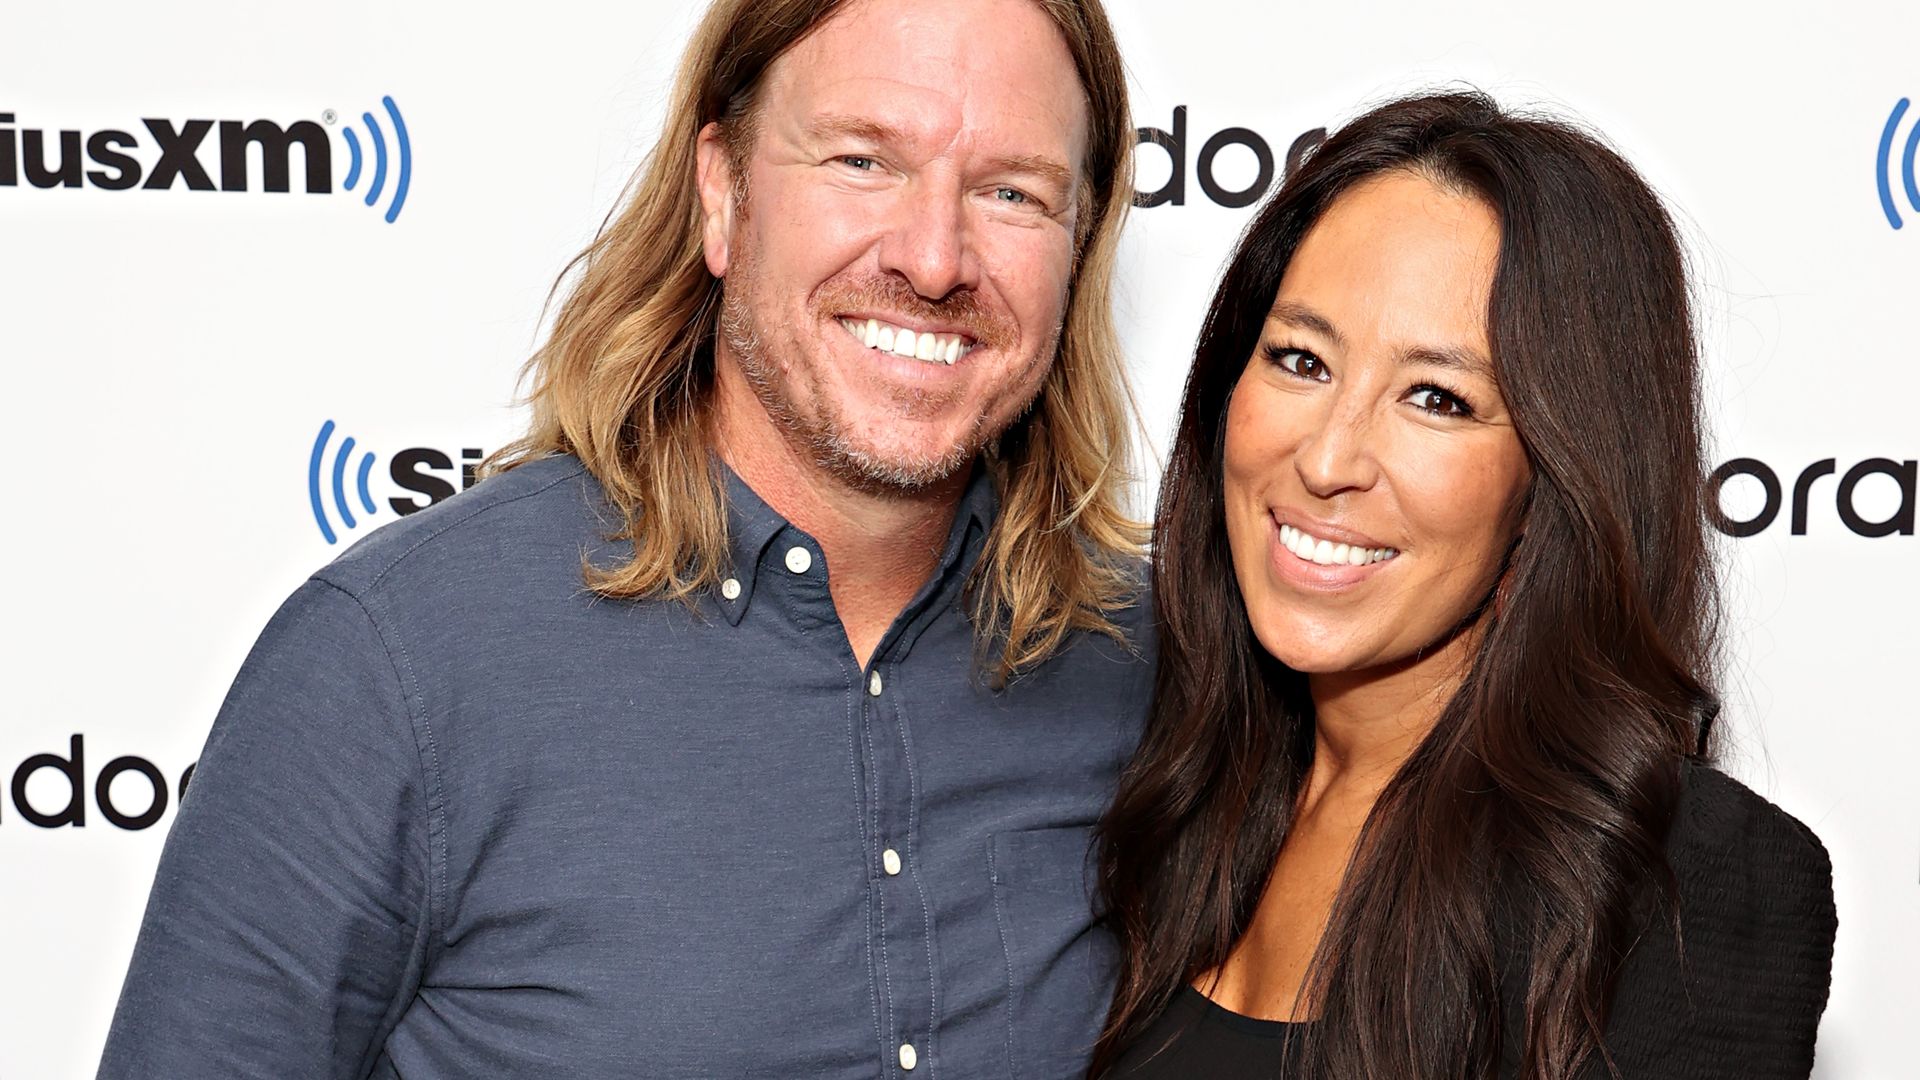 Chip and Joanna Gaines smiling at the camera on a red carpet